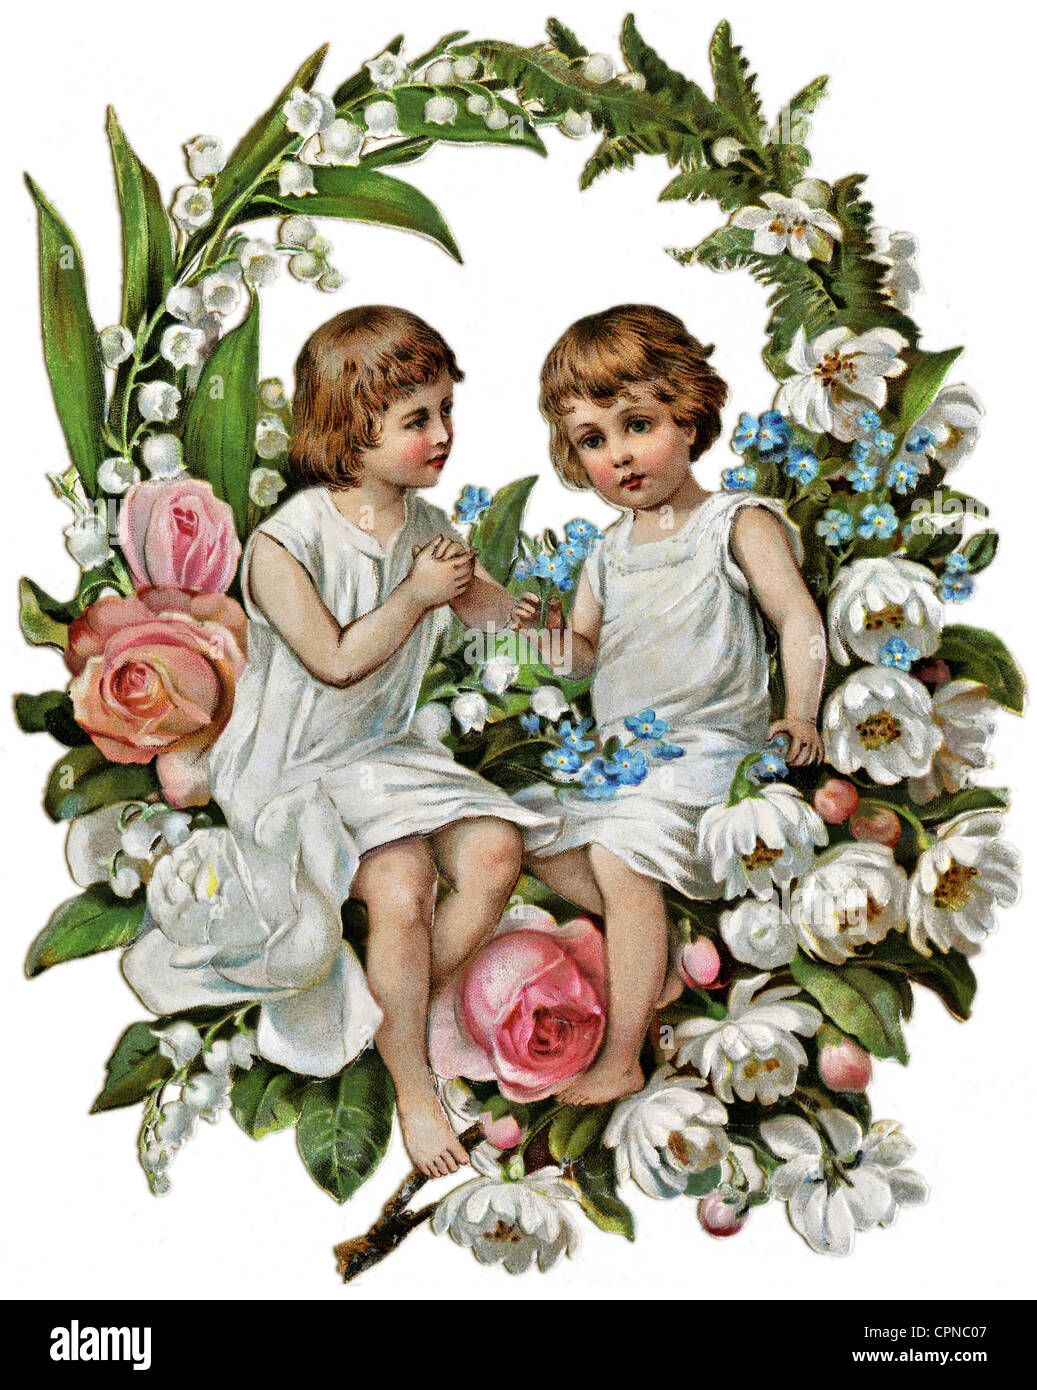 kitsch / souvenir, children in wreath, scrap-picture, Germany, 1893, two, 2, wreath of blossom, frames, frame, framing, flowers, flower, oval, wreath, chaplet, wreaths, chaplets, symbol, symbols, symbolic, symbolical, Mother's Day, congratulations, good wishes, charming, scrap-picture, scraps, chromos, scrap-pictures, scrap picture, scrap pictures, glossy prints, decorative, decoration, decorations, deco, litho, lithograph, lithographing, illustration, clipping, cut out, cut-out, cut-outs, 19th century, historic, historical, people, Additional-Rights-Clearences-Not Available Stock Photo